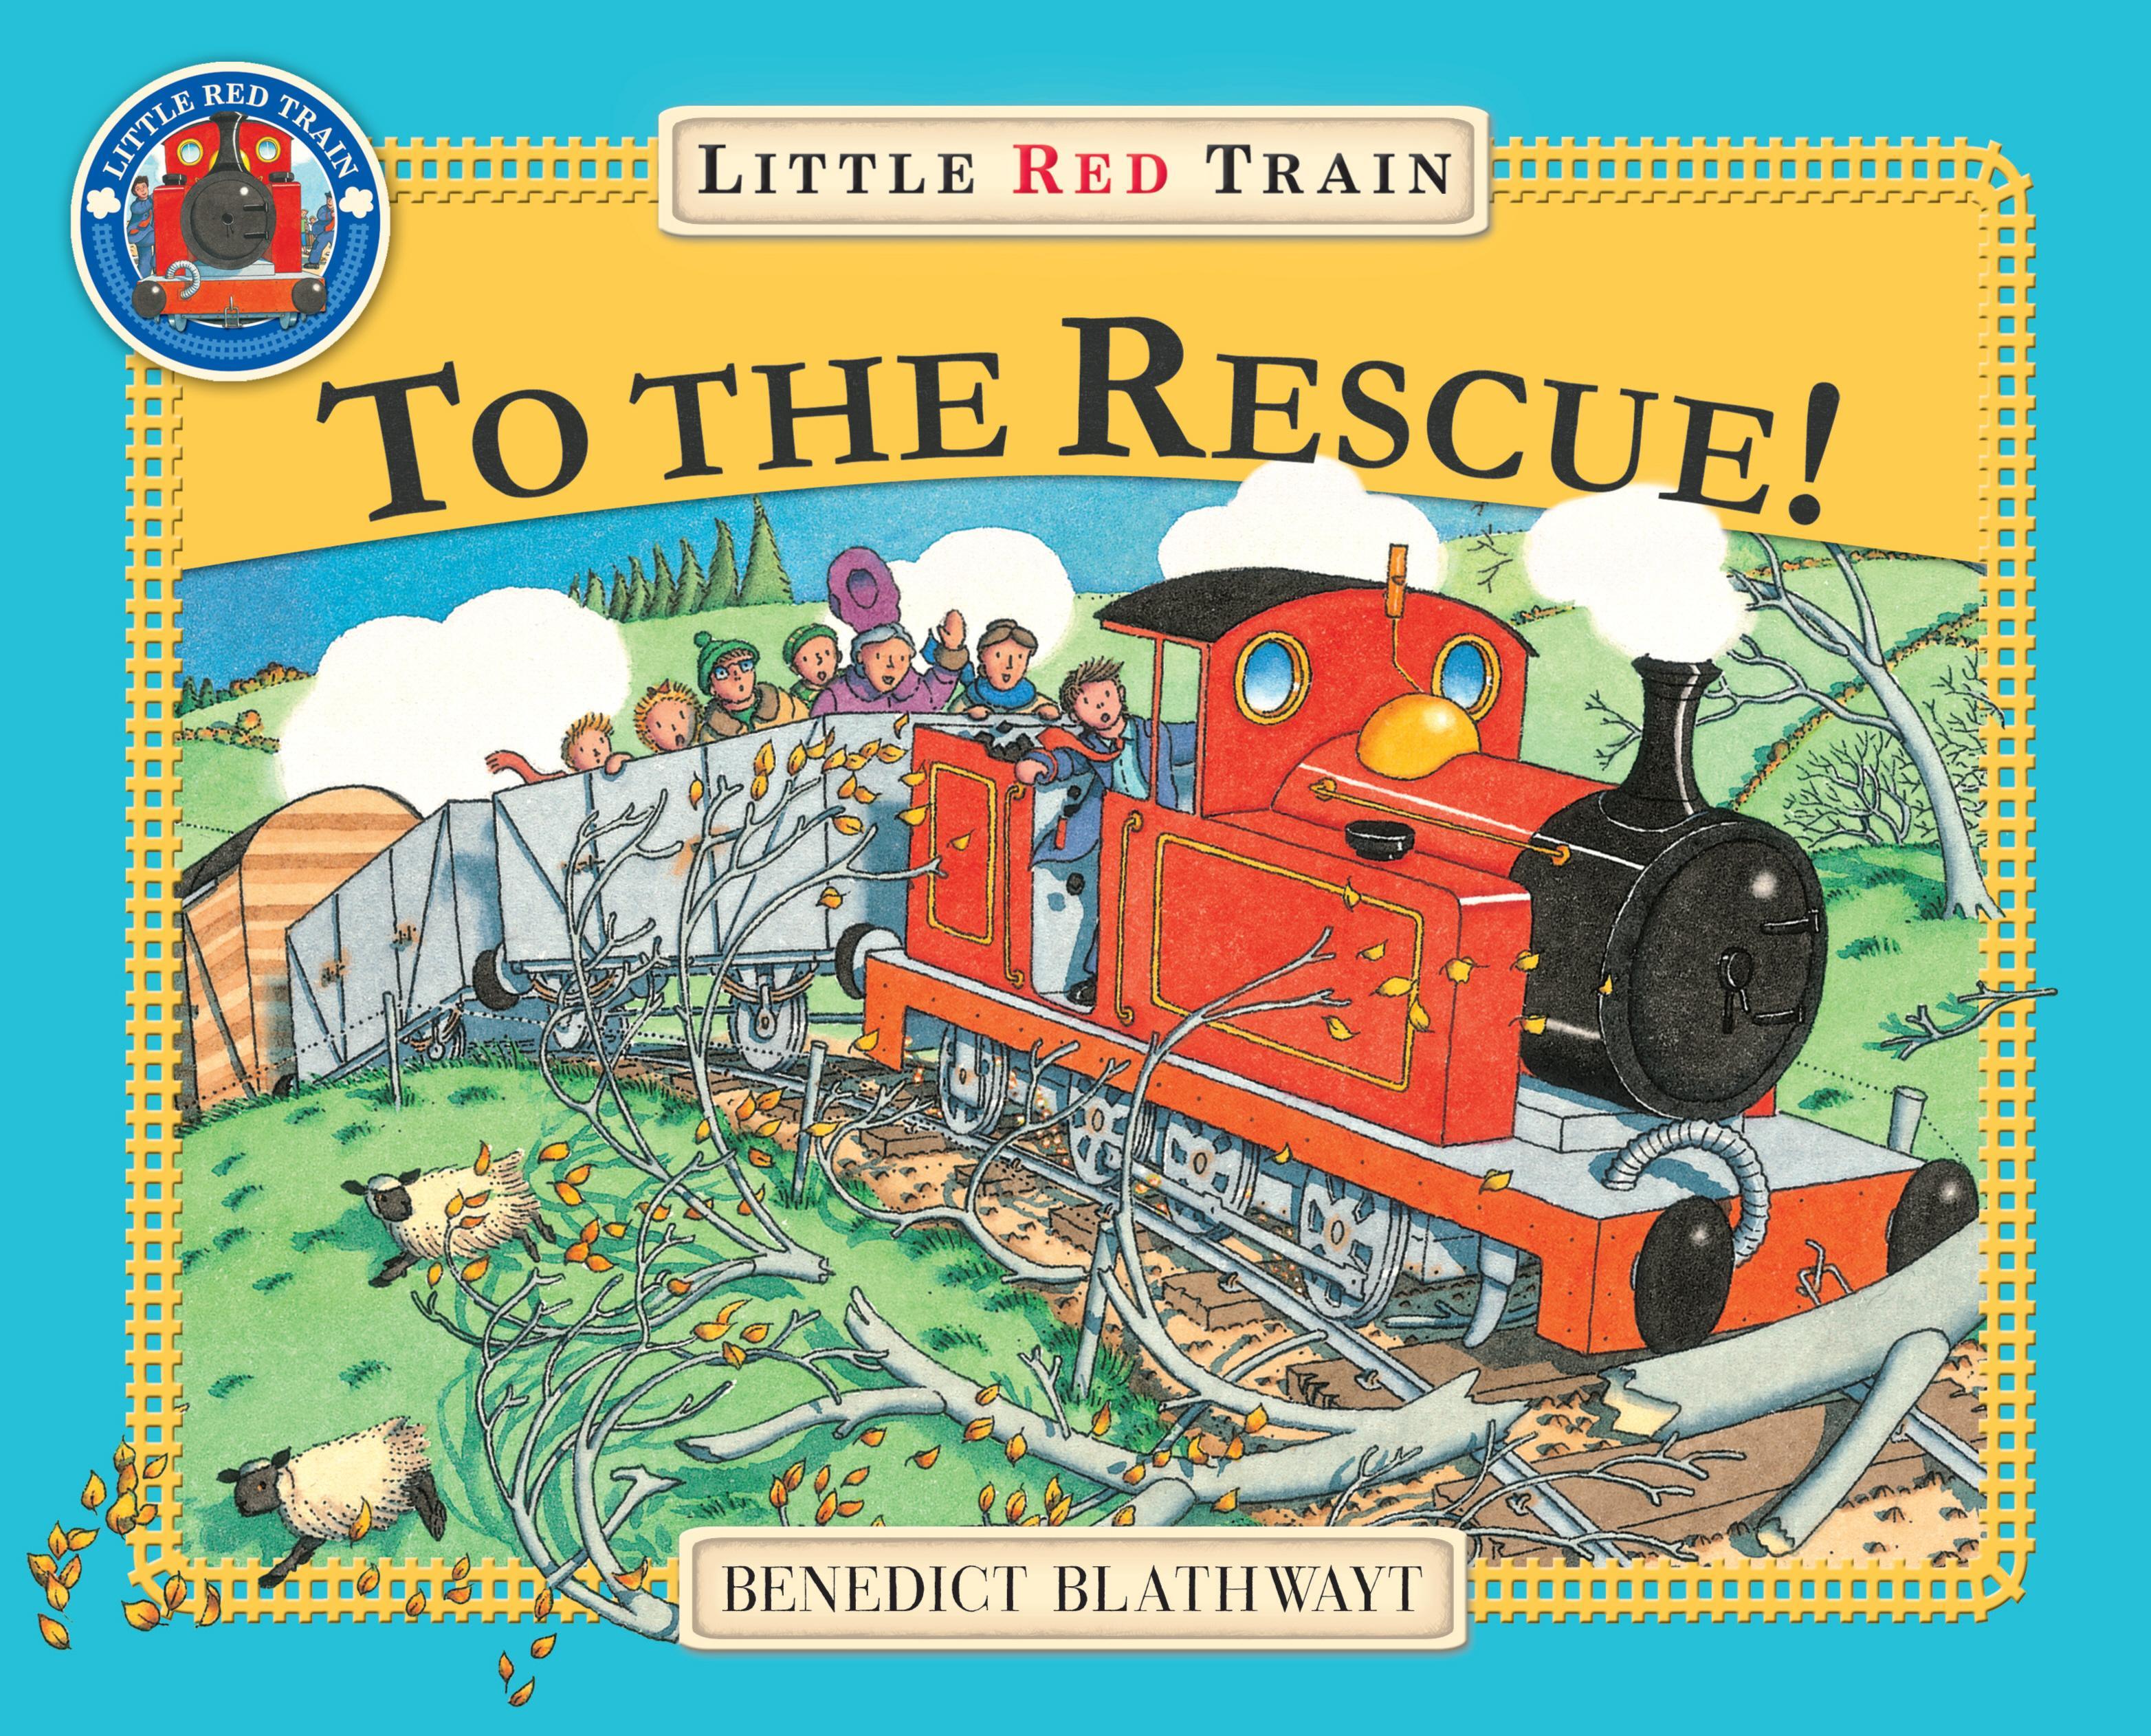 Little Red Train: To The Rescue - Benedict Blathwayt